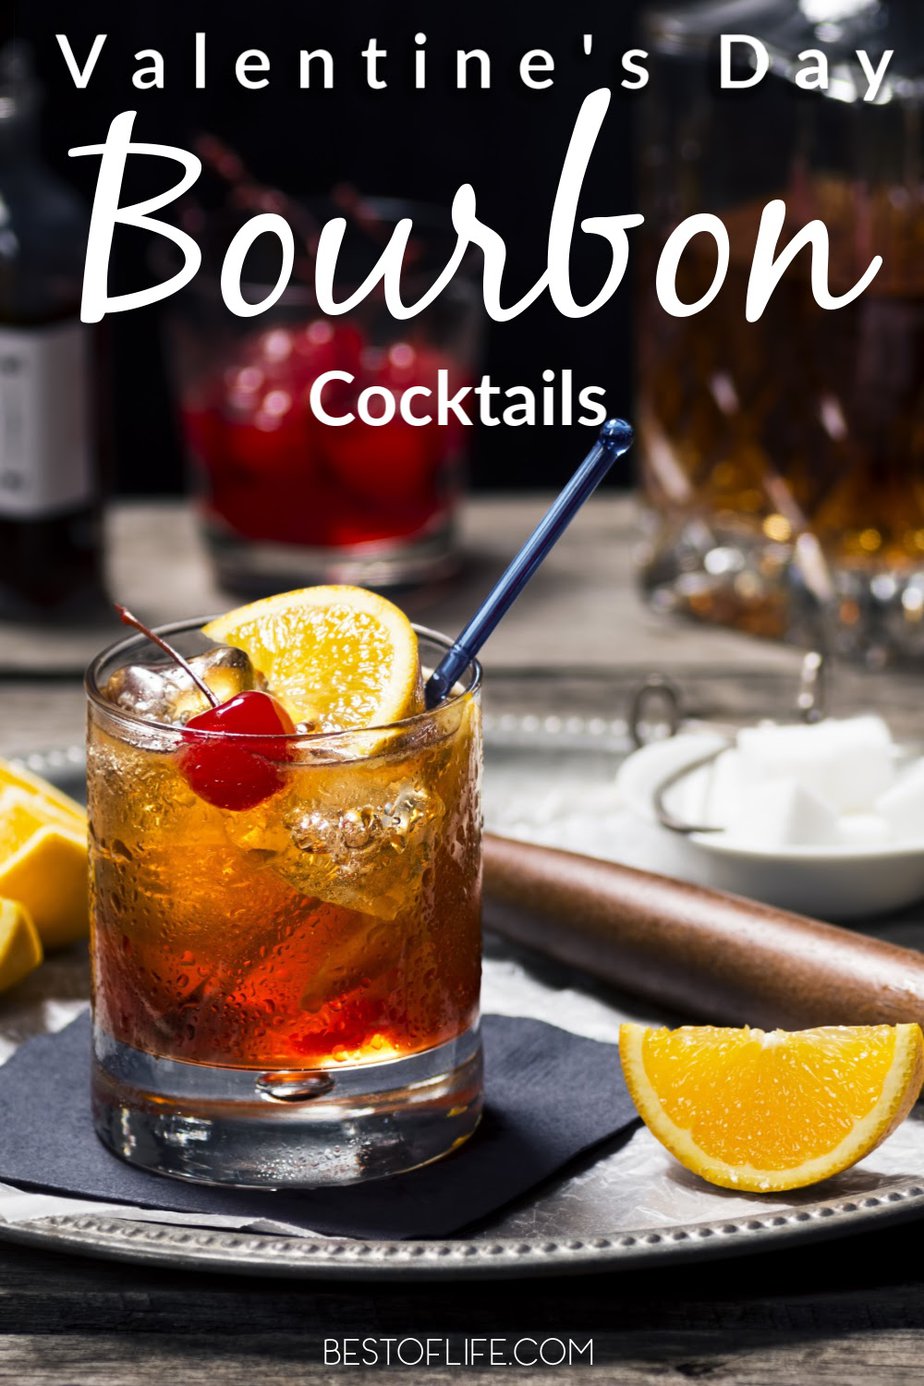 The best Valentine’s Day bourbon cocktails will set the mood for Valentine’s Day or any date night that you will both enjoy! Winter Bourbon Cocktails | Cocktails with Bourbon | Cocktail Recipes for Two | Easy Cocktail Recipes | Date Night Recipes #valentinesday #cocktails